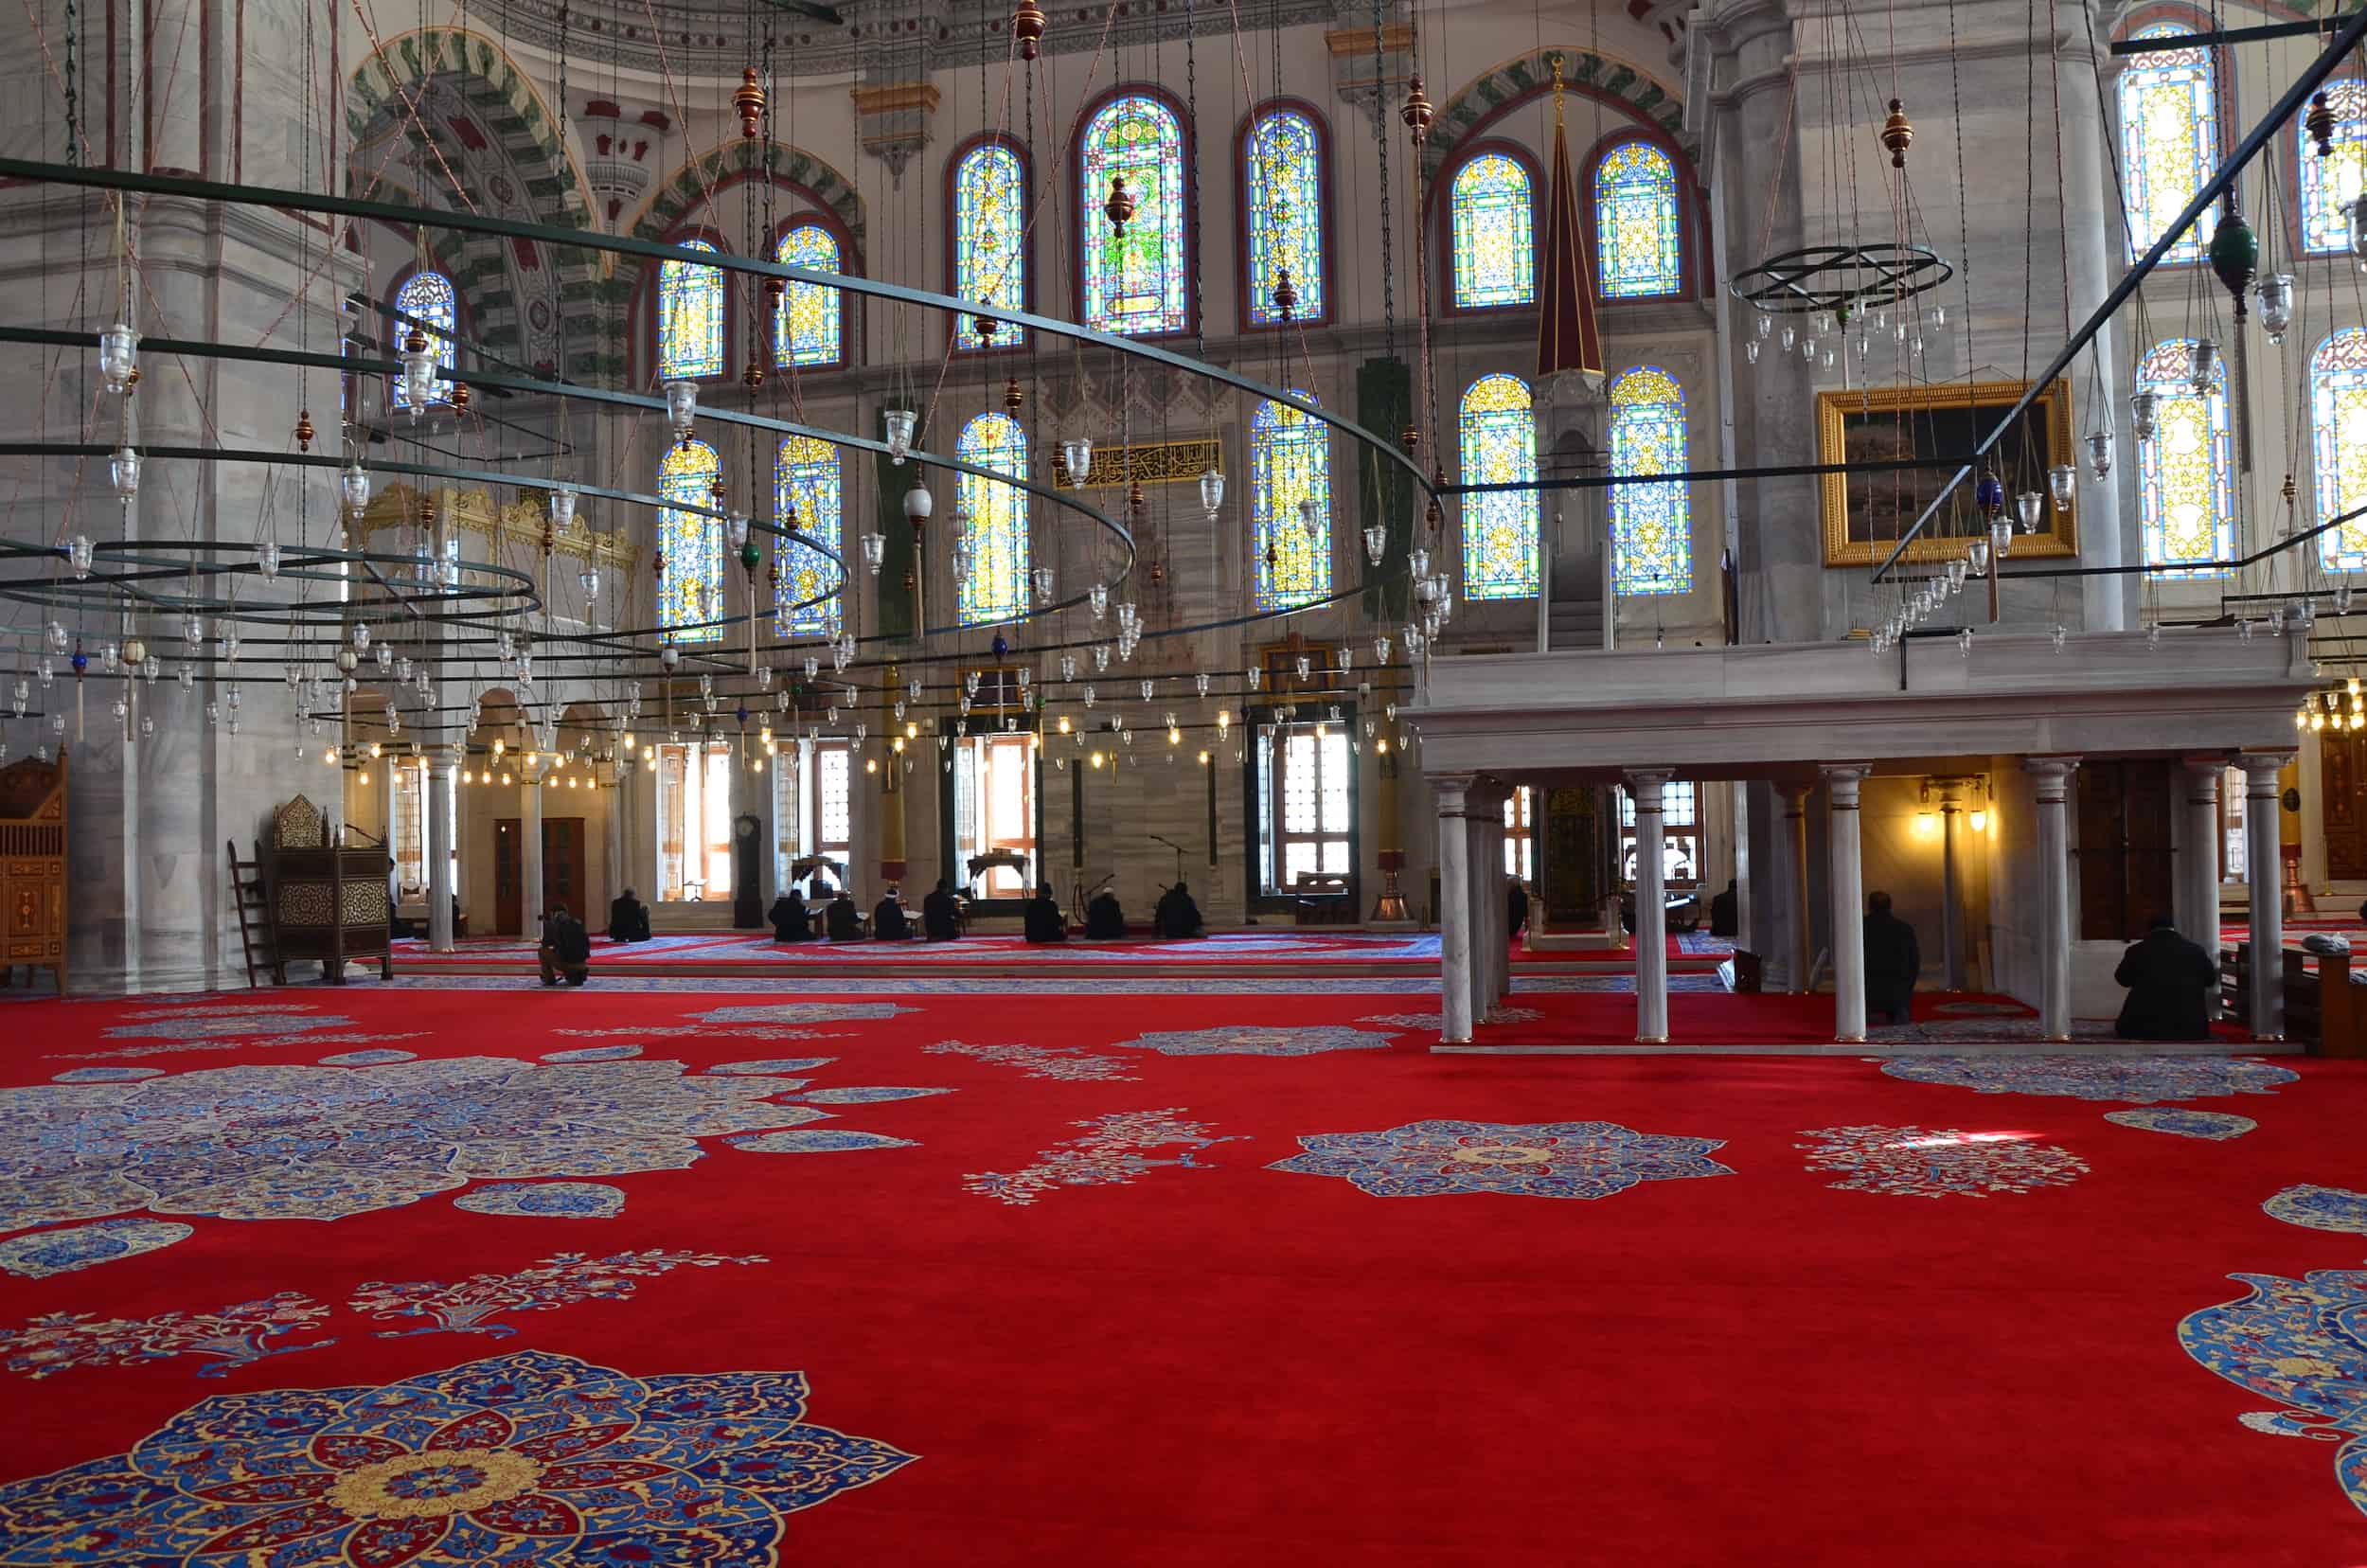 Prayer hall at the Fatih Mosque in Istanbul, Turkey